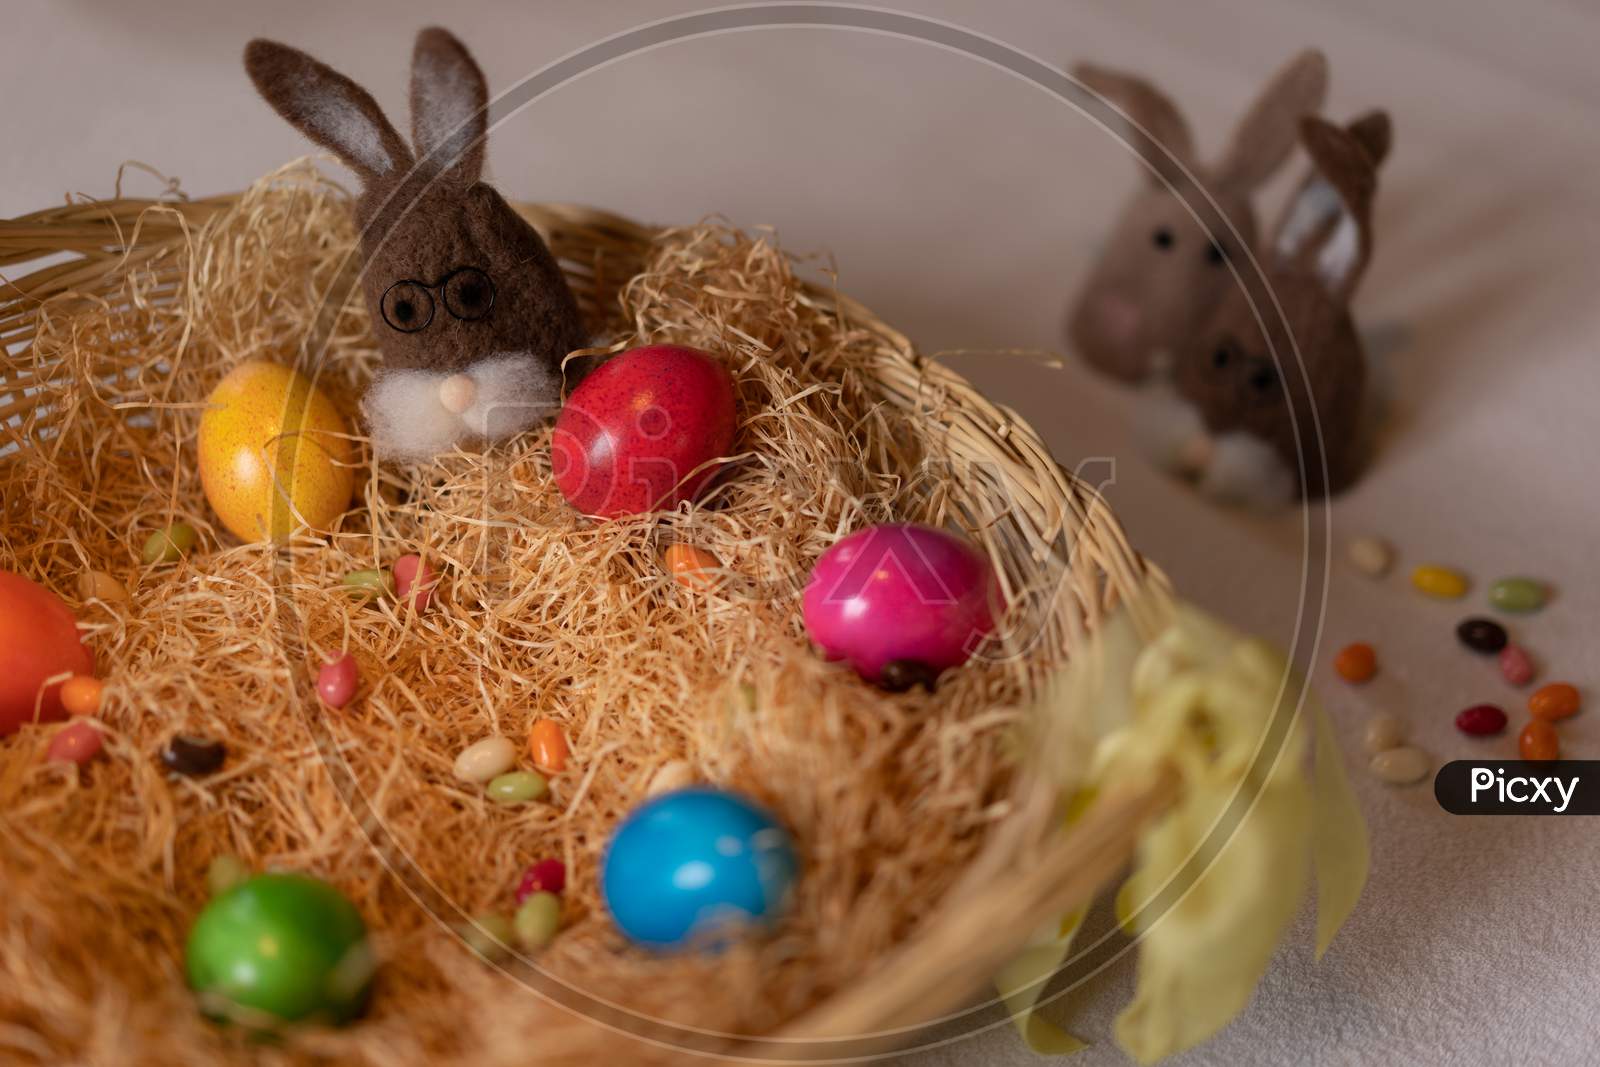 Colored Easter Eggs And Caps Of Brown Felt Bunnies In Nest Of Straw With Colorful Sweet Sugar Eggs. Felt Bunnies To Keep Eggs Warm.